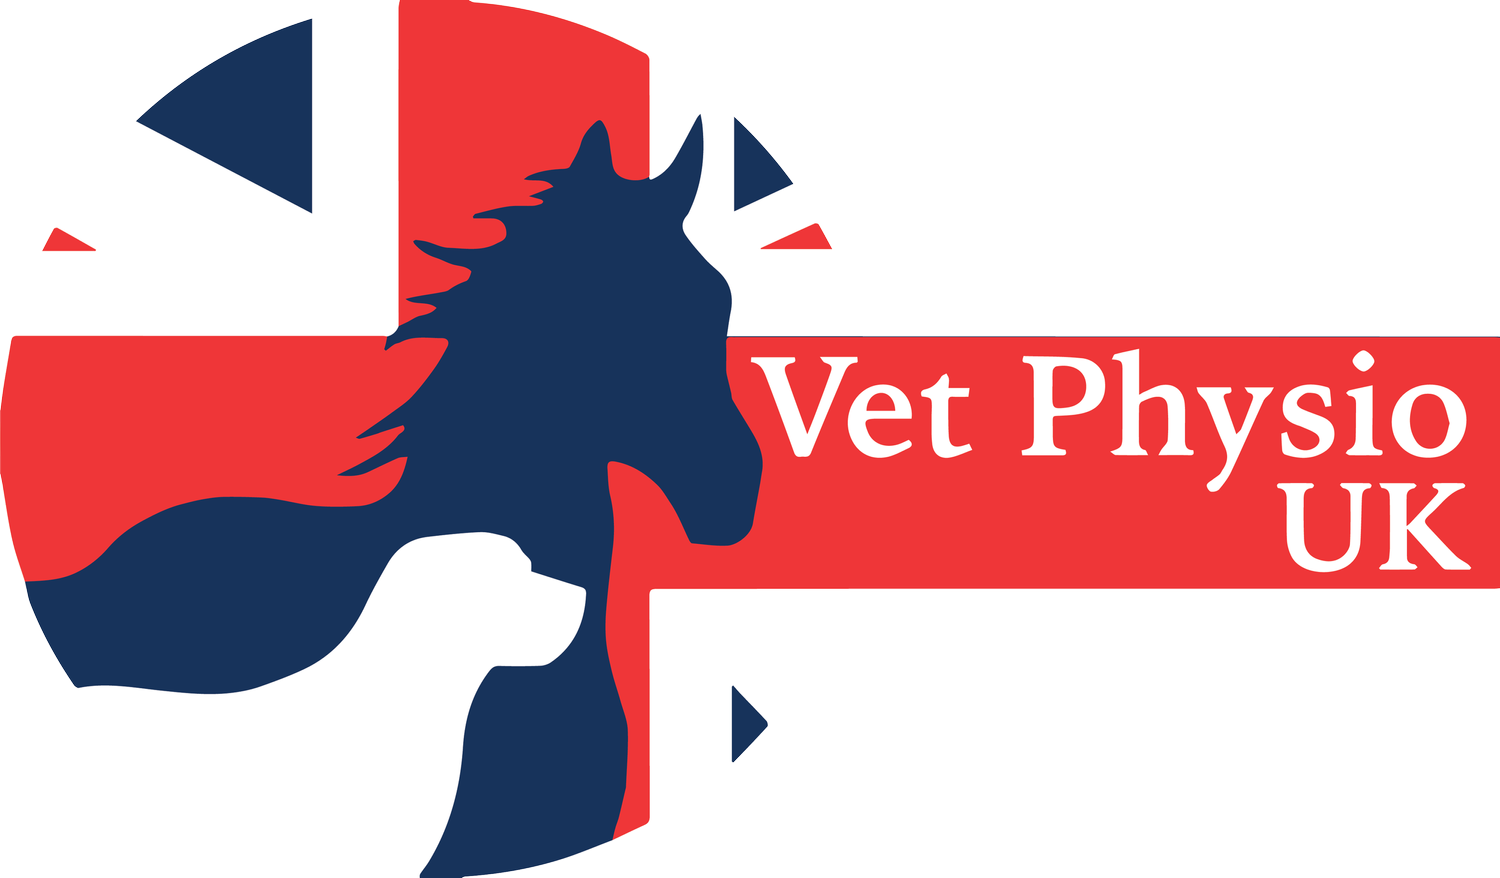 Welcome to Vet Physio UK